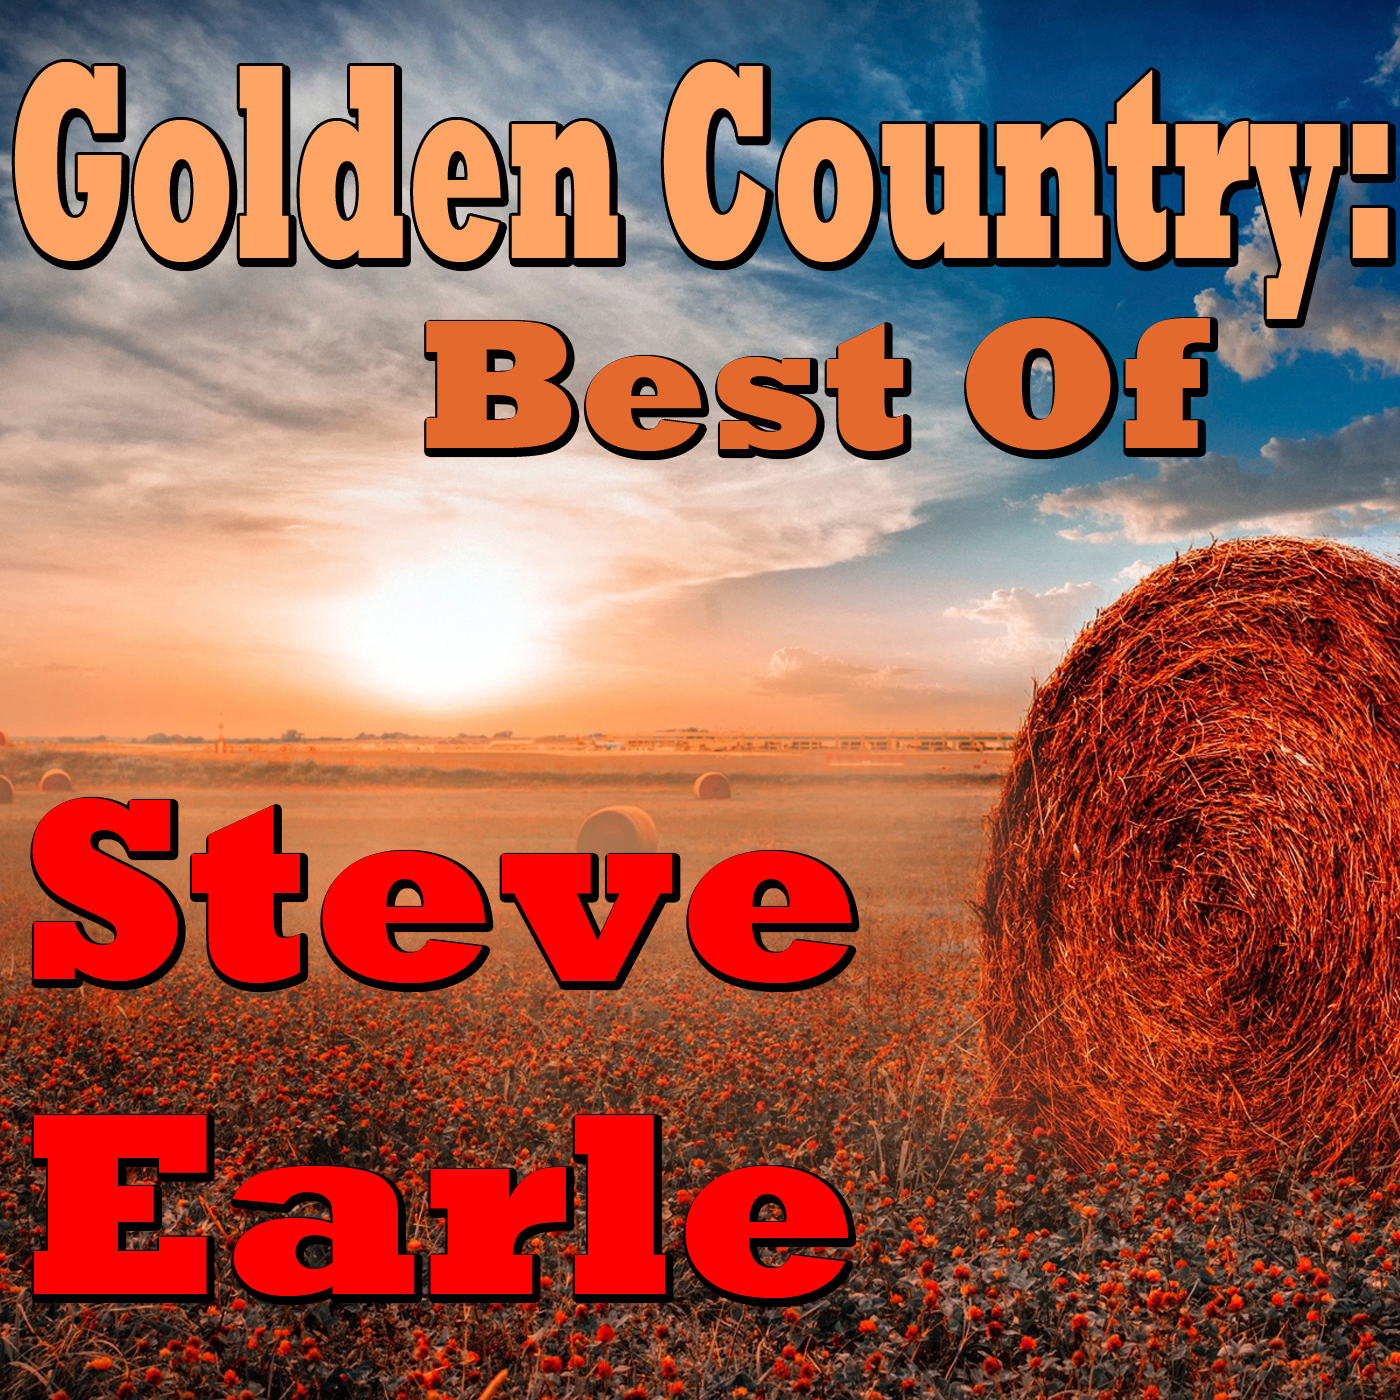 Golden Country: Best Of Steve Earle (Live)